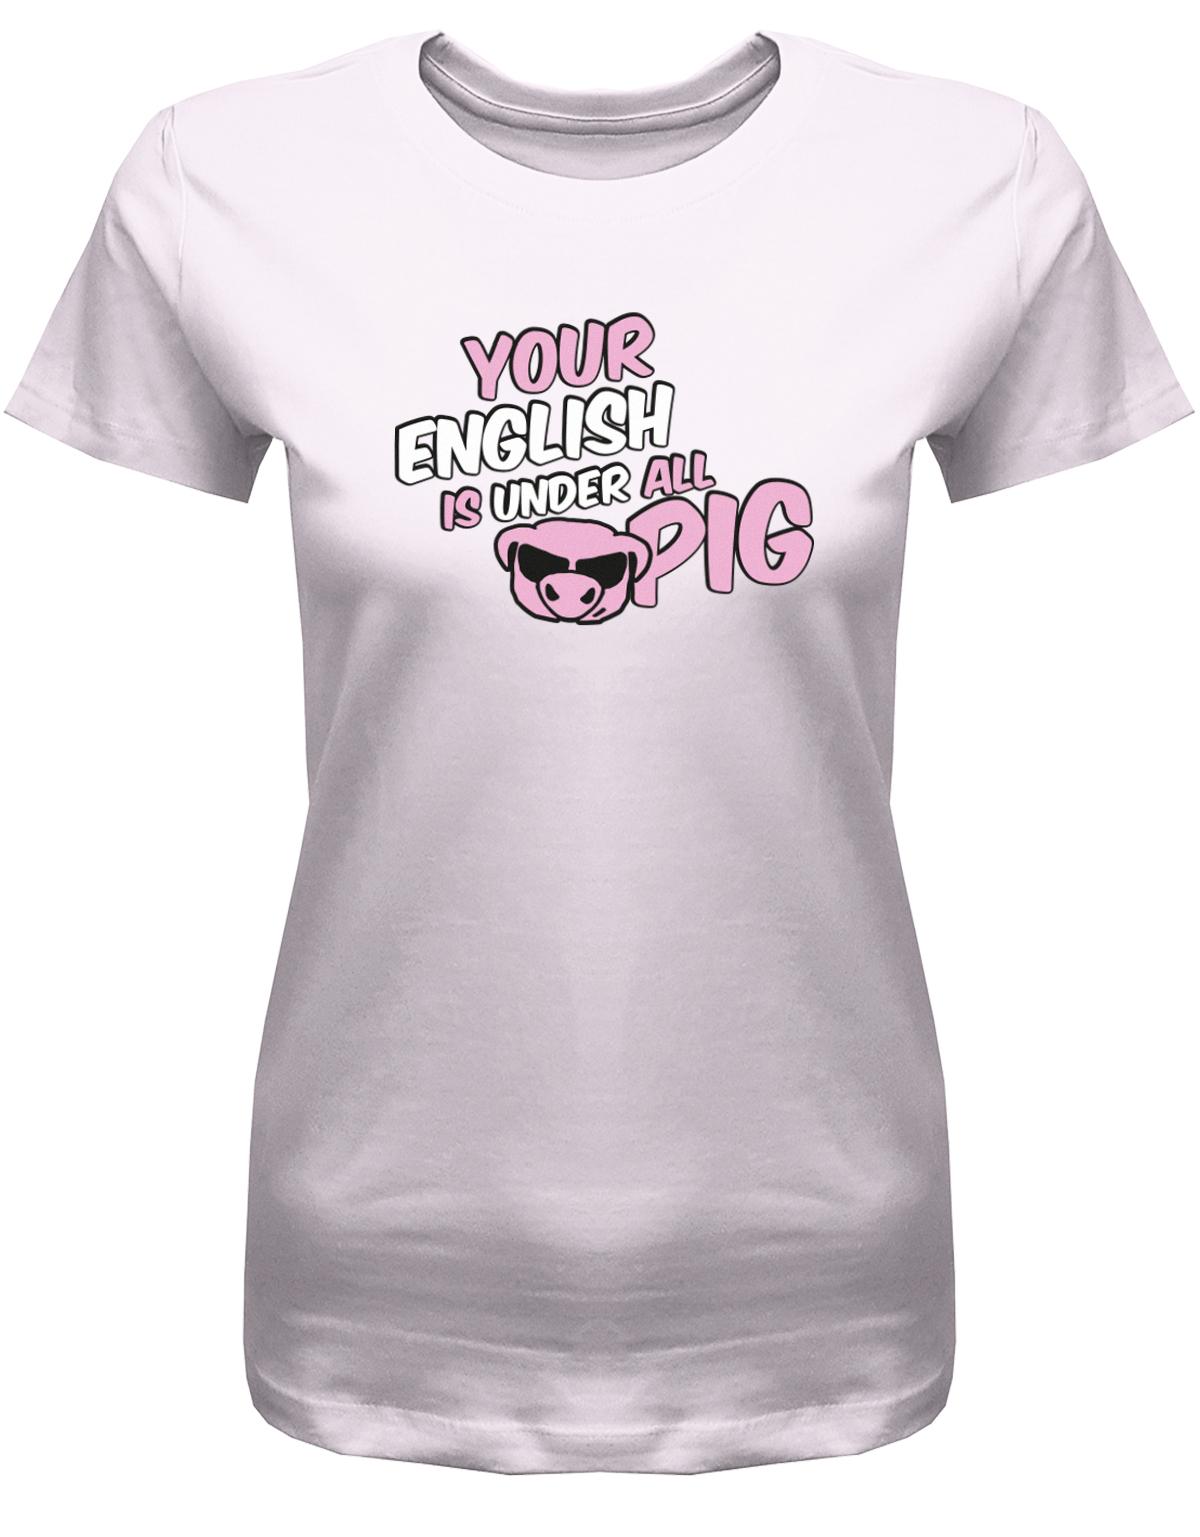 your-english-is-under-all-pig-Damen-Shirt-Rosa